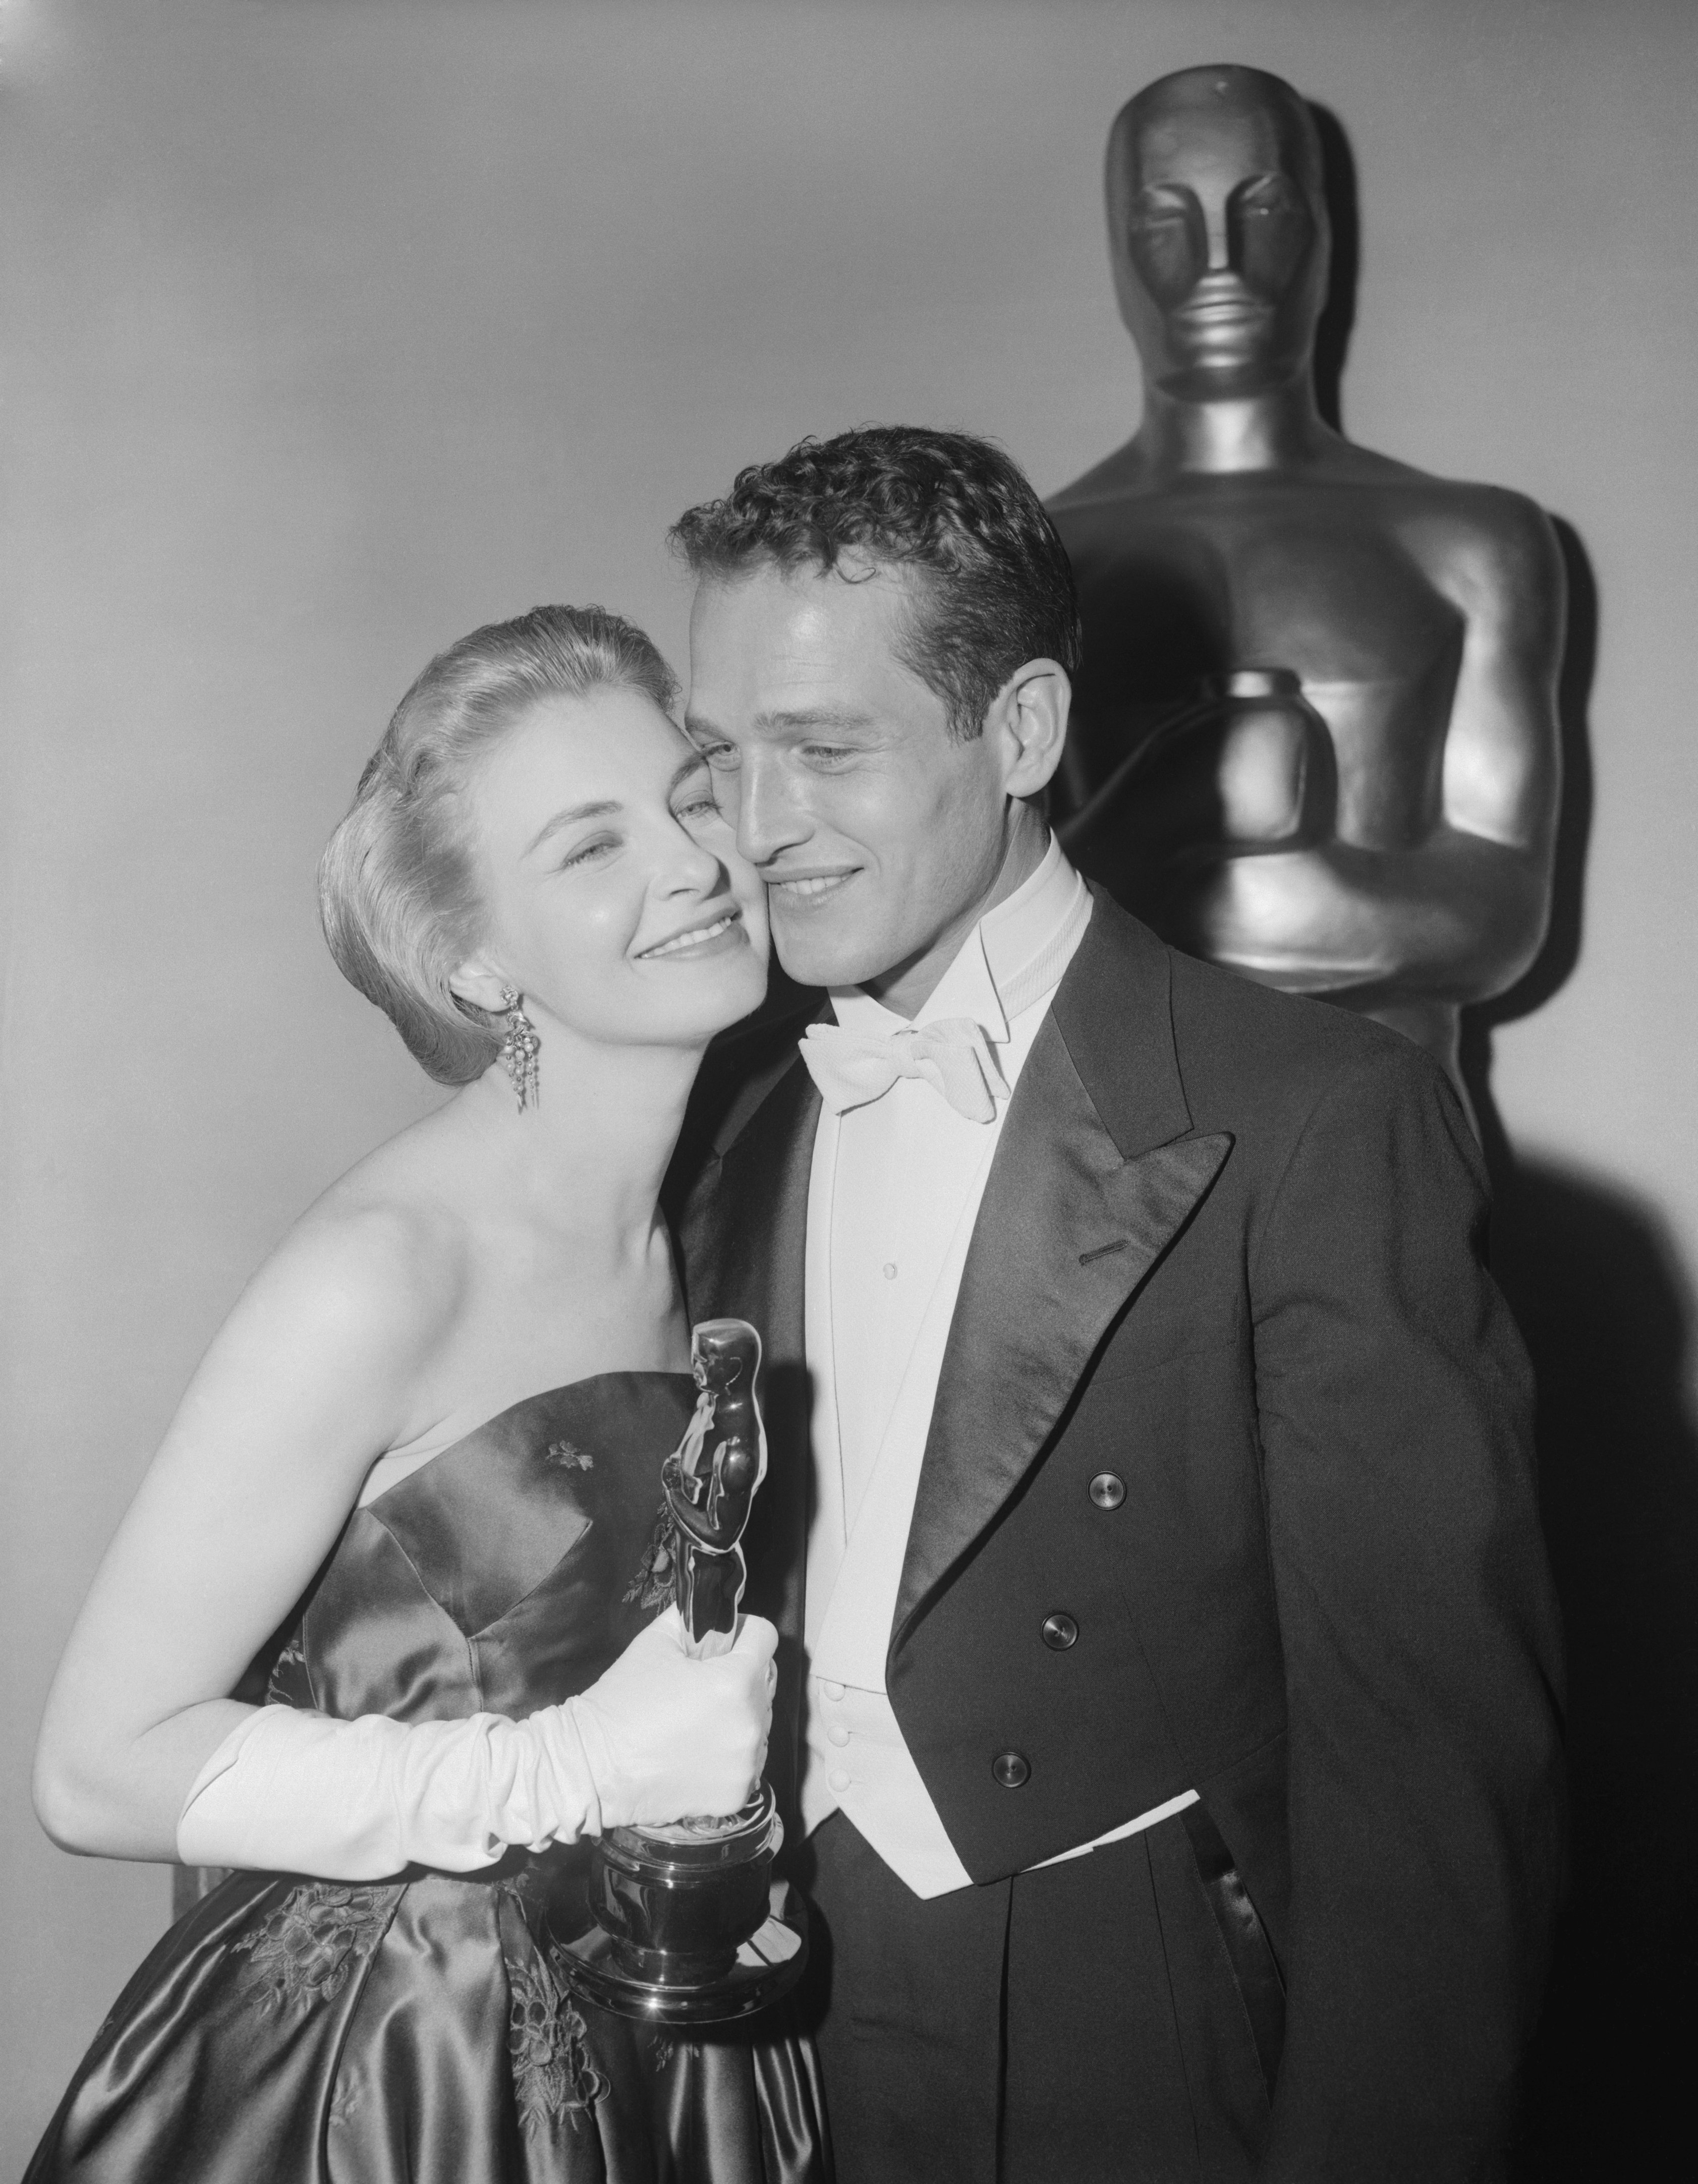 Joanne Woodward holding her award beside Paul Newman at the 30th Annual Academy Awards on March 26, 1958, in Hollywood, California | Source: Getty Images